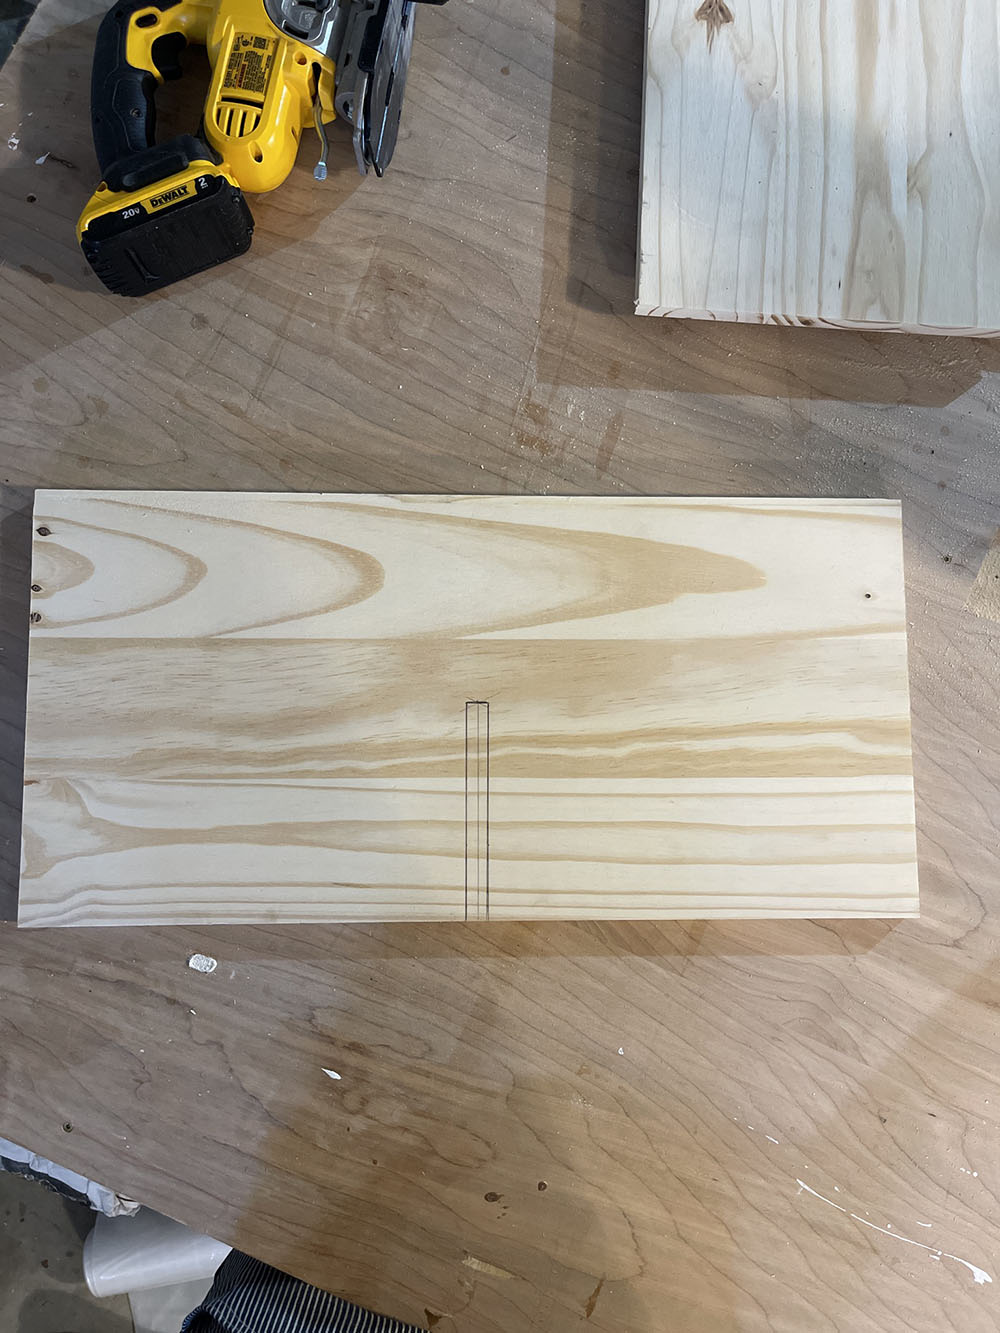 A piece of wood with a small rectangle drawn out of it.